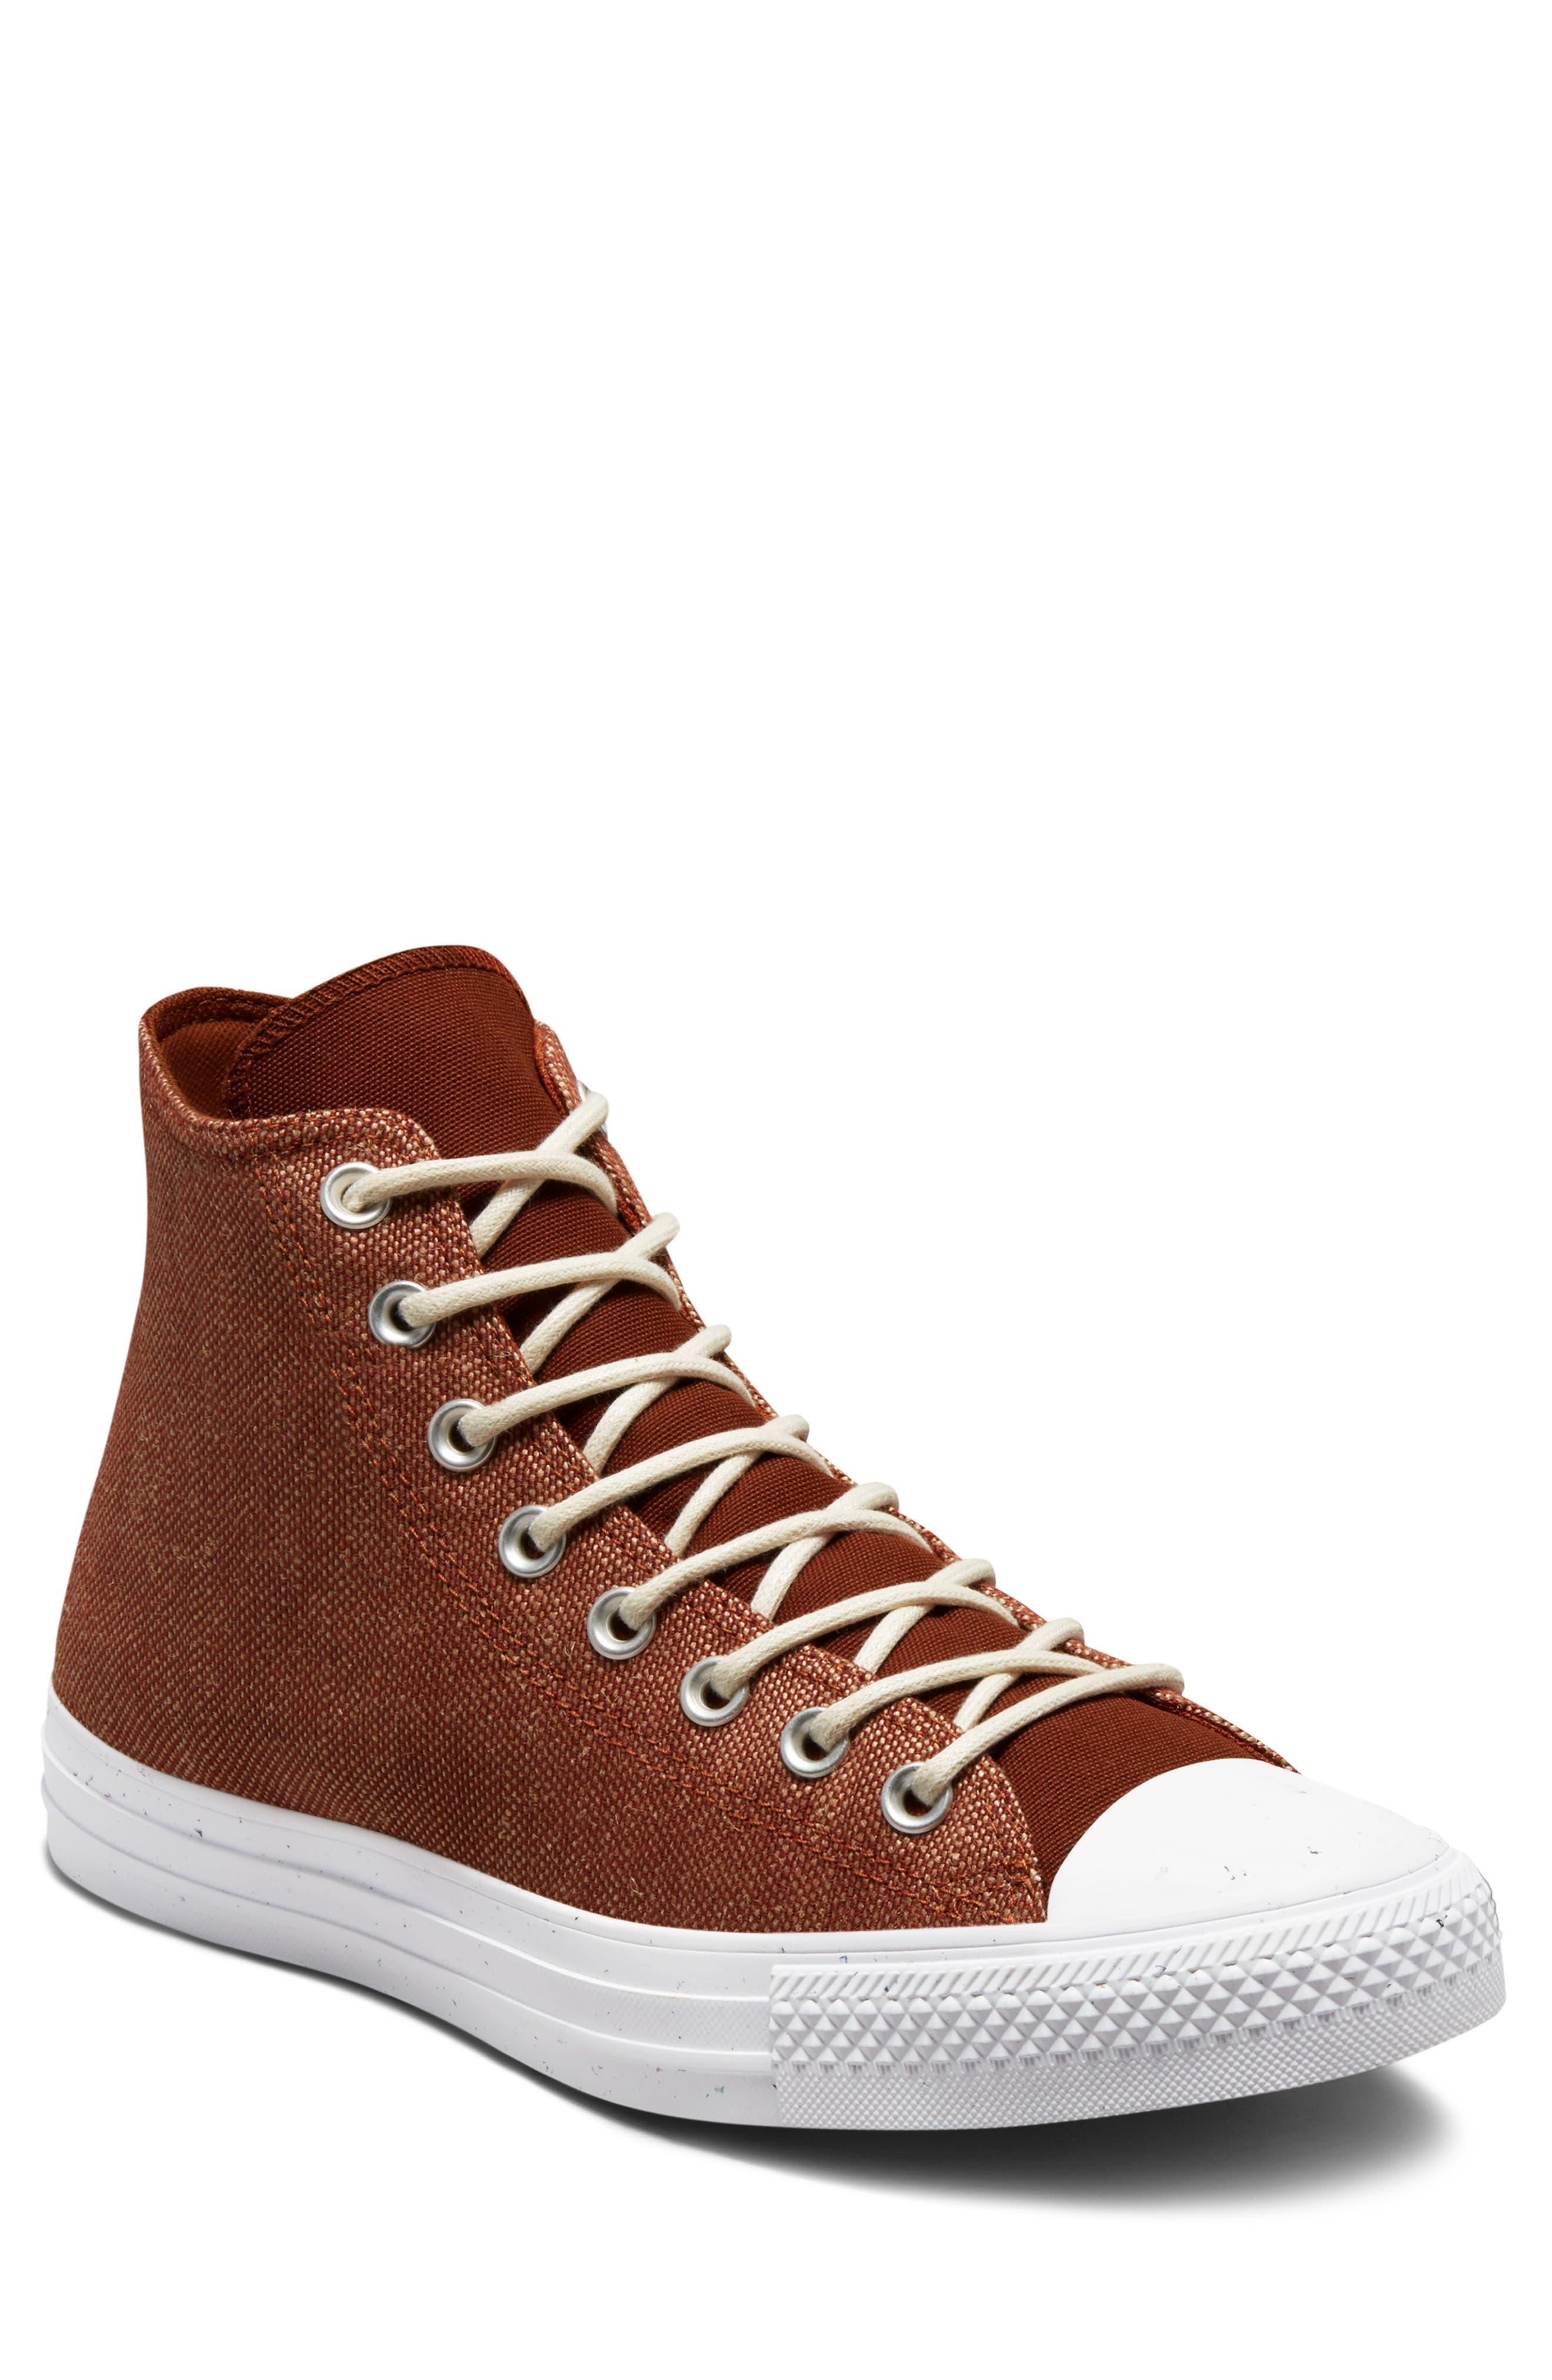 converse leather shoes brown